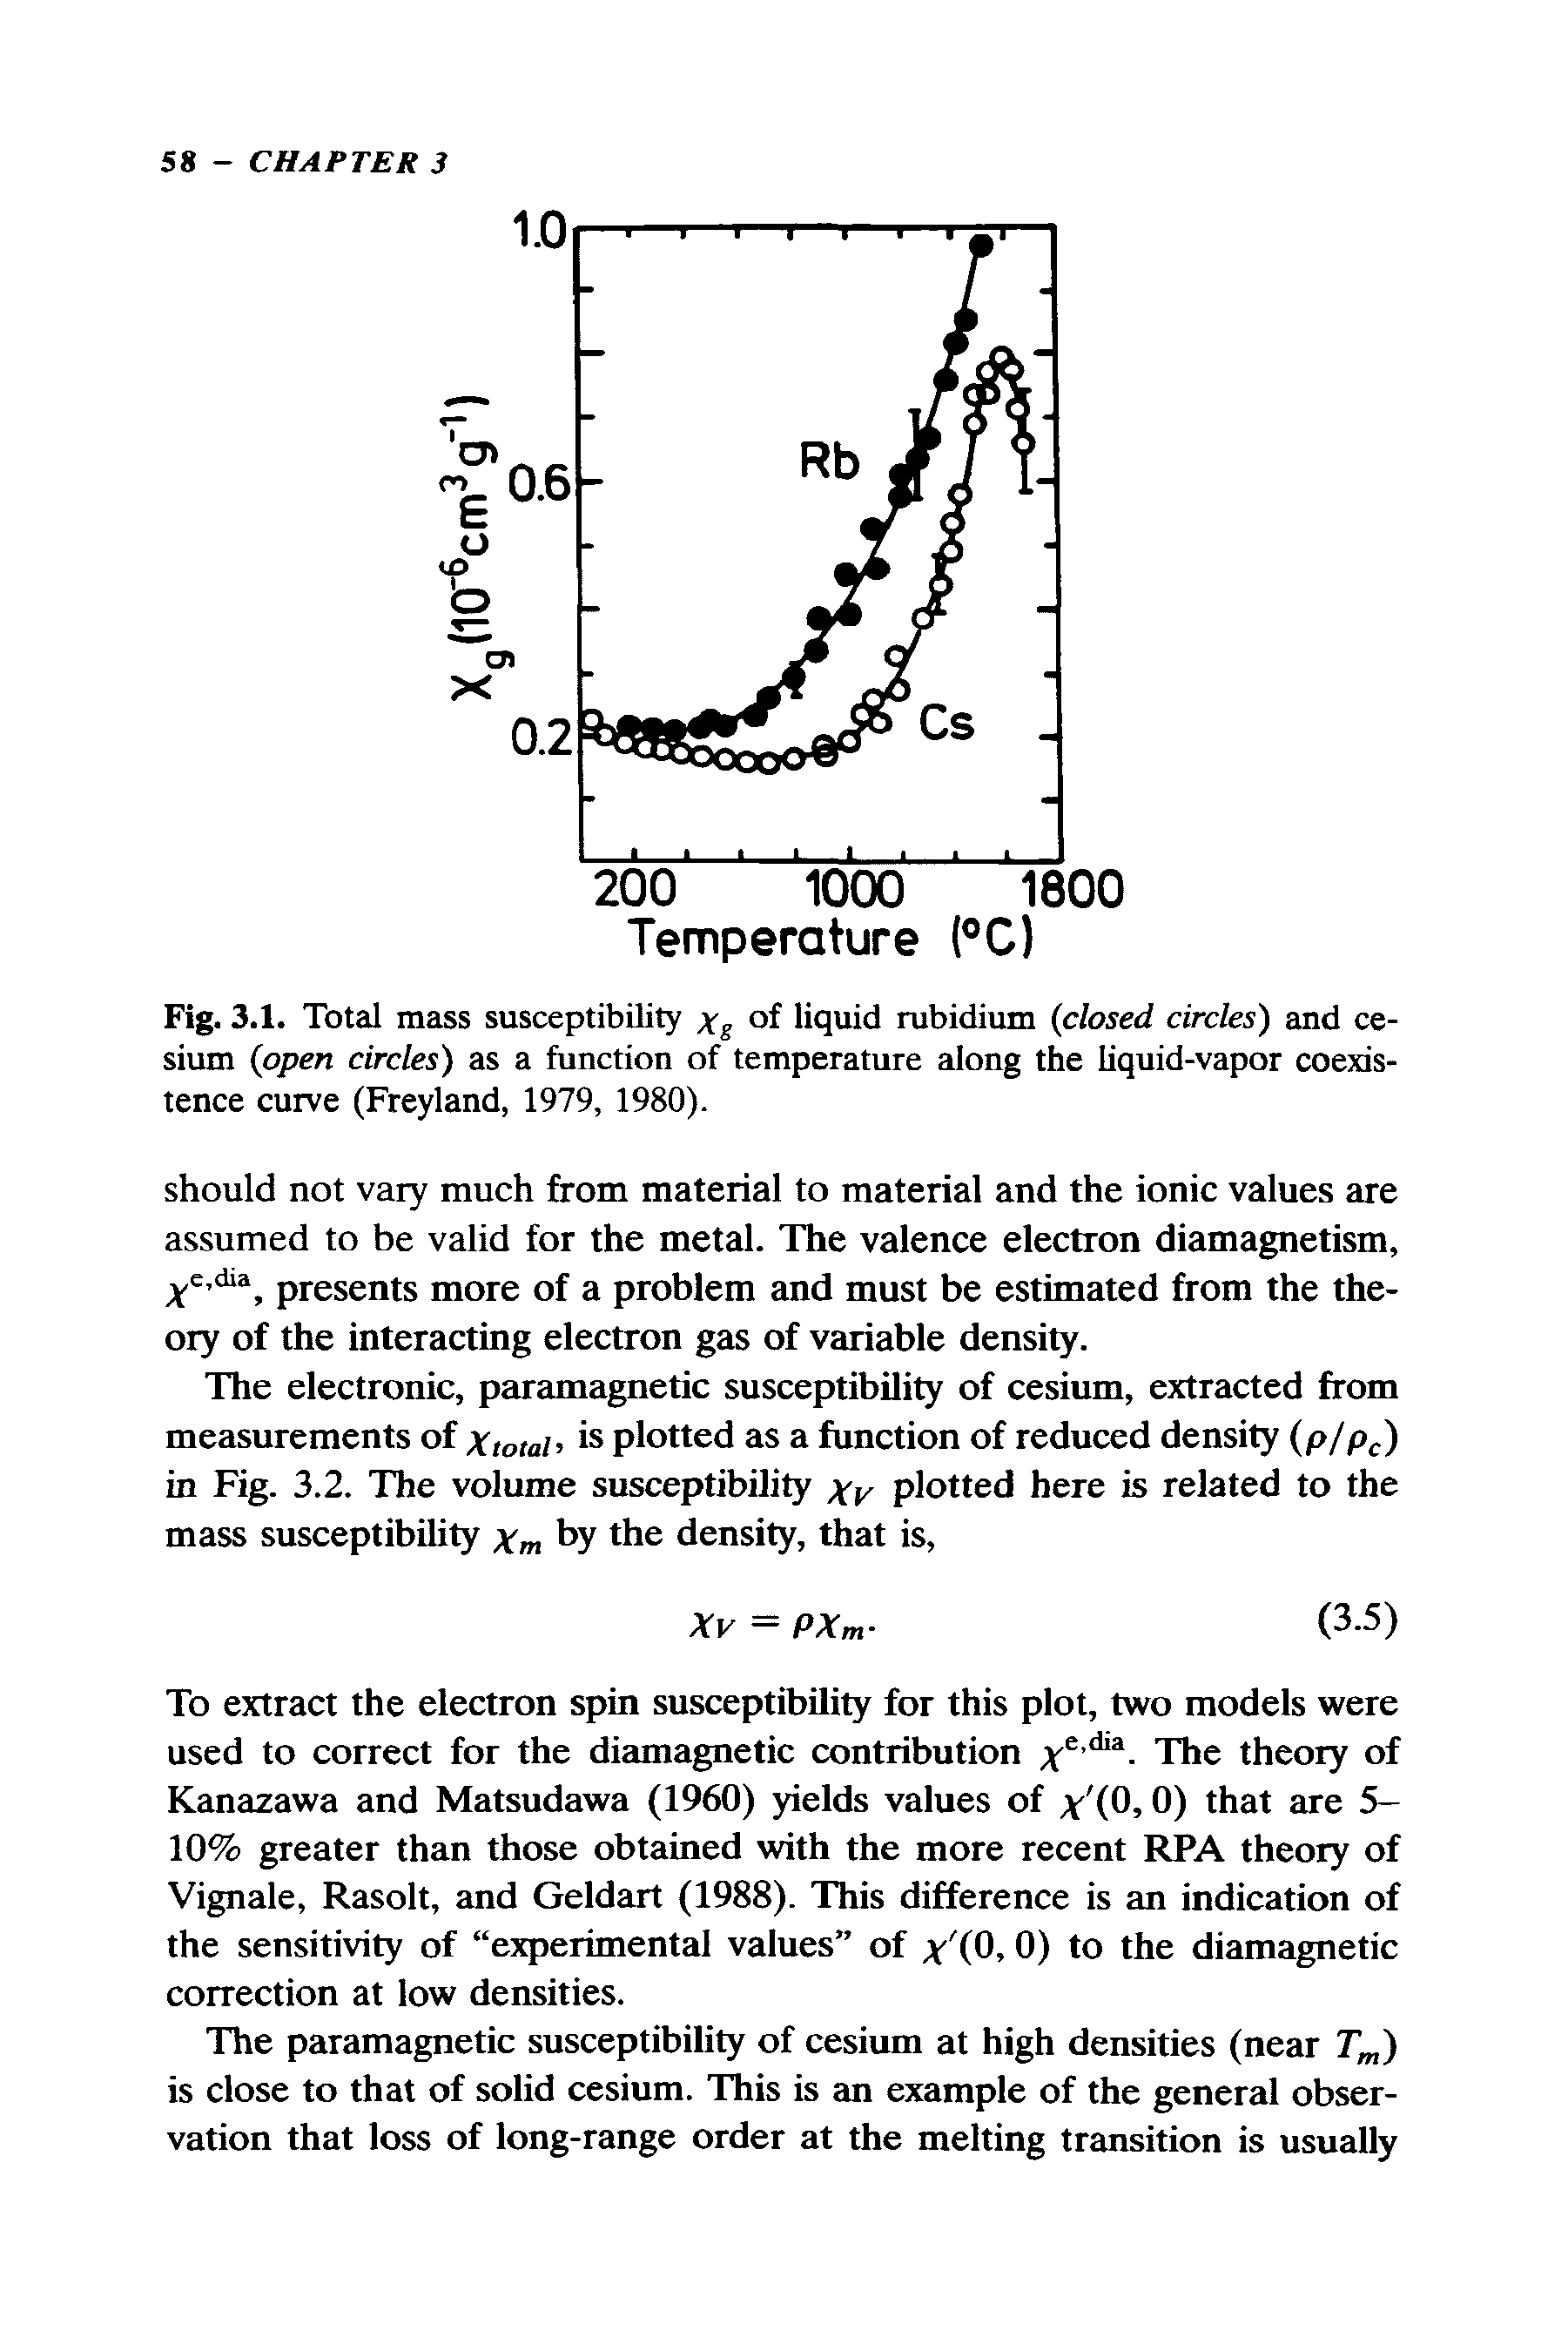 Fig. 3.1. Total mass susceptibility Xg of liquid rubidium closed circles) and cesium open circles) as a function of temperature along the liquid-vapor coexistence curve (Freyland, 1979, 1980).